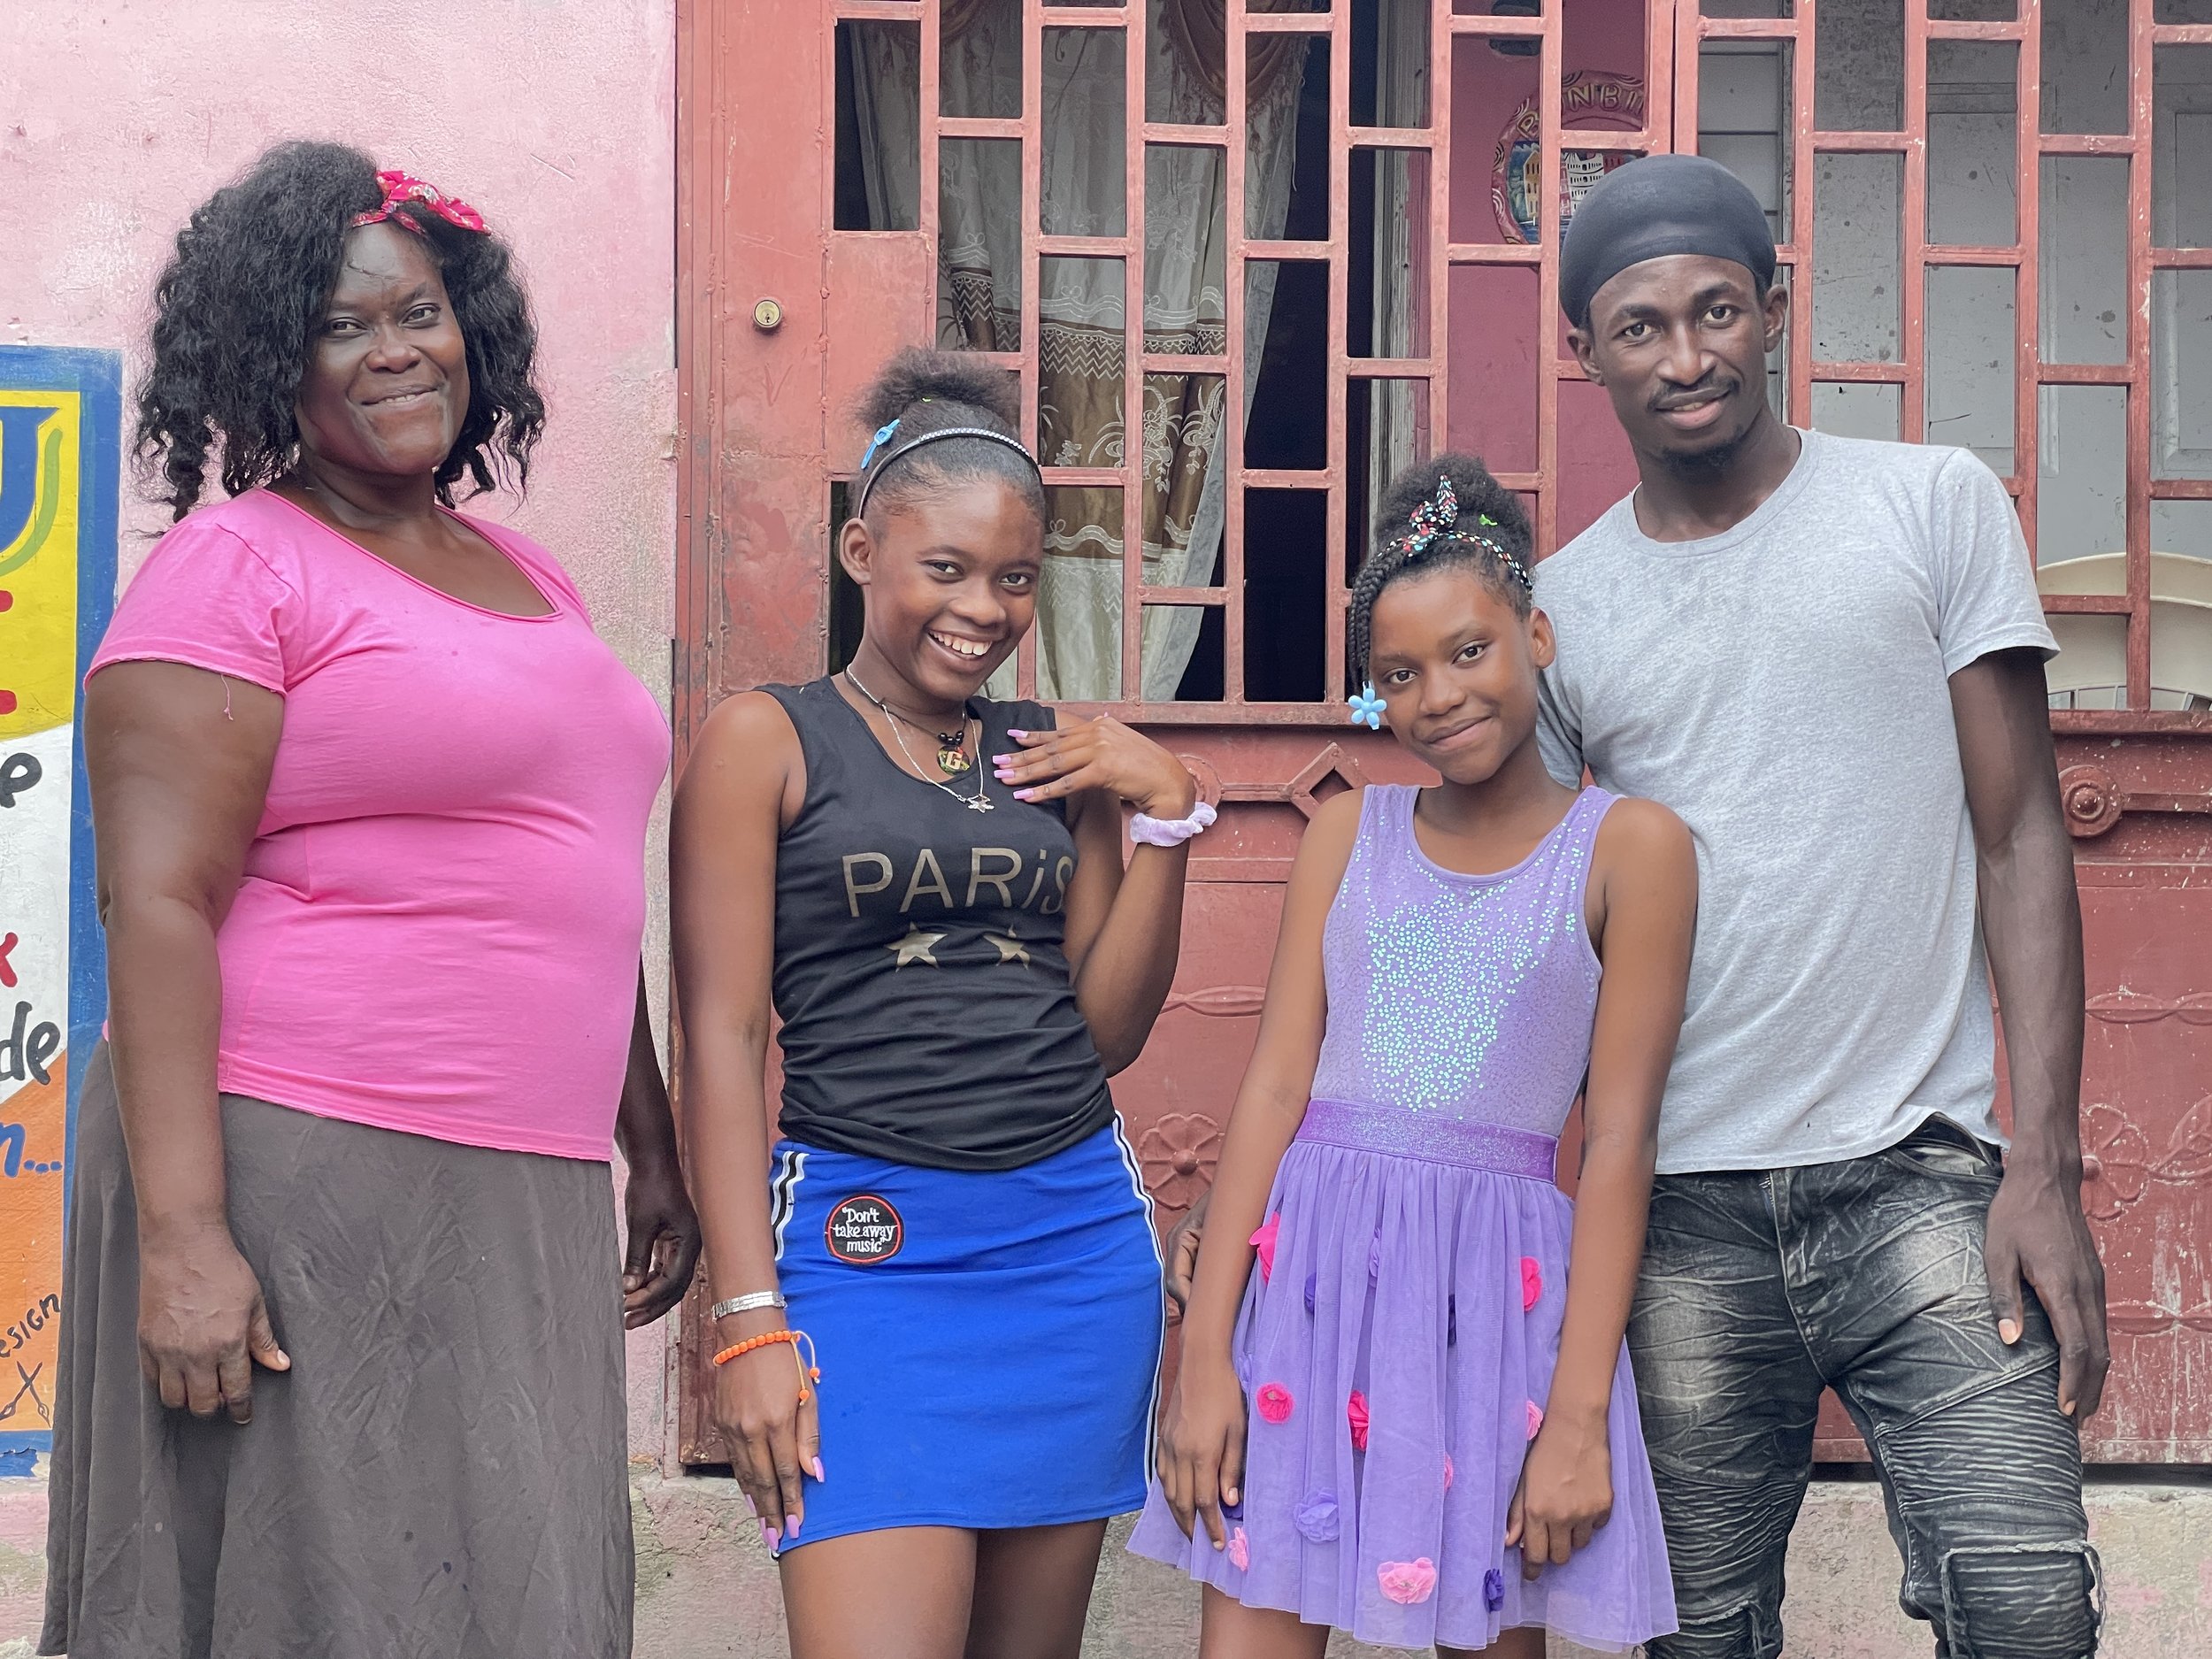  Here’s Liliane with her girls and her partner. Her income through her business has enabled her to provide for her young family, including sending her girls to school. They’re both at the top of their class and because of you, they have the opportuni